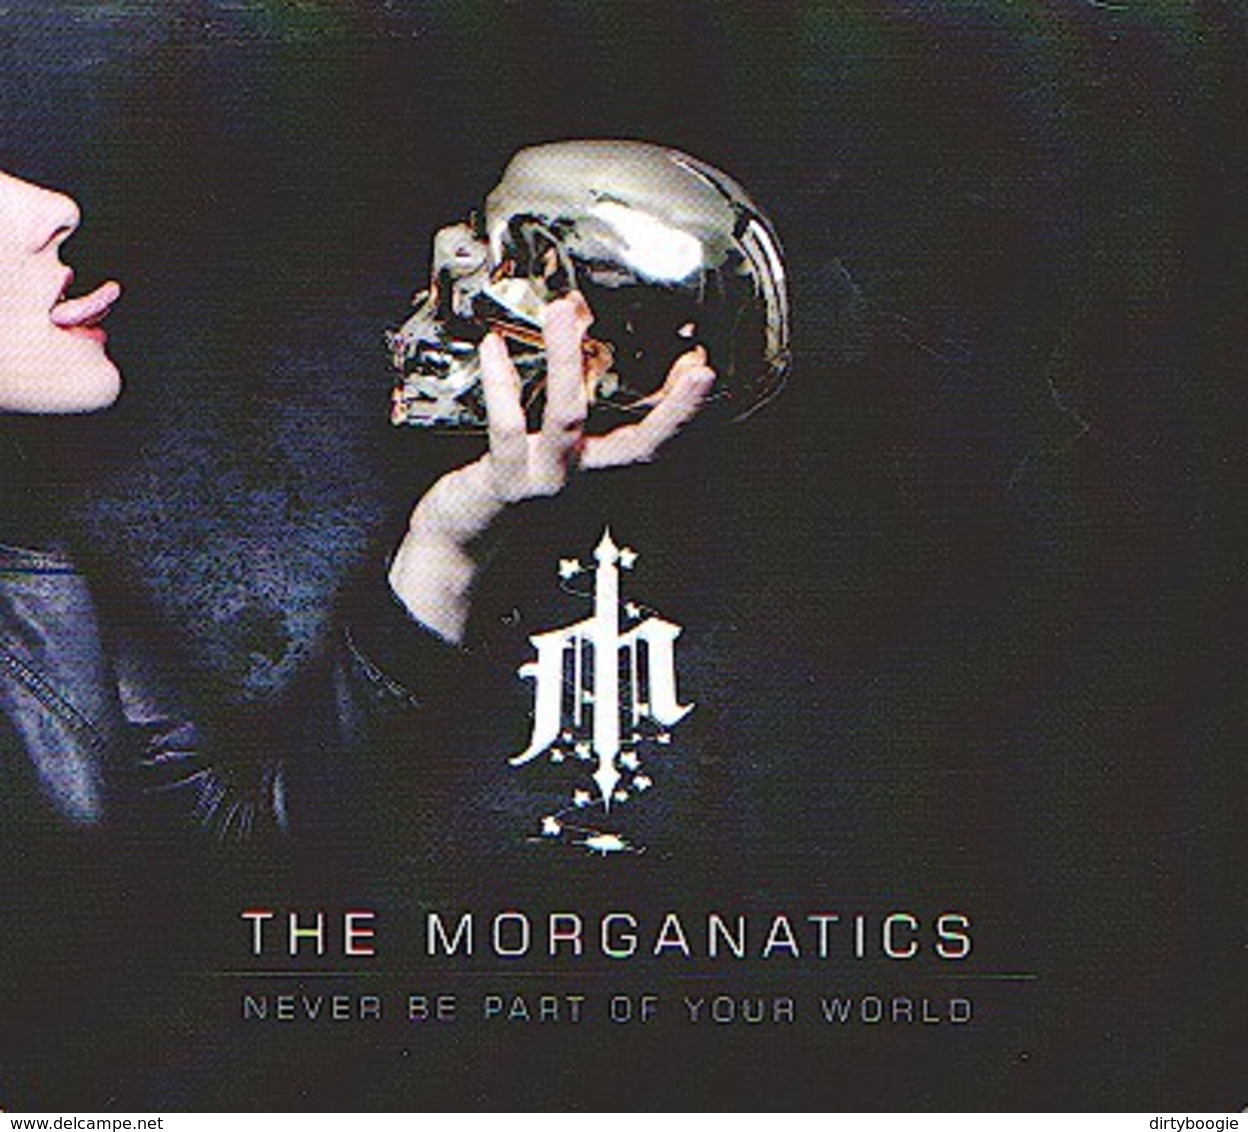 The MORGANATICS - Never Be Part Of Your World - CD - NEW WAVE METAL - Hard Rock & Metal